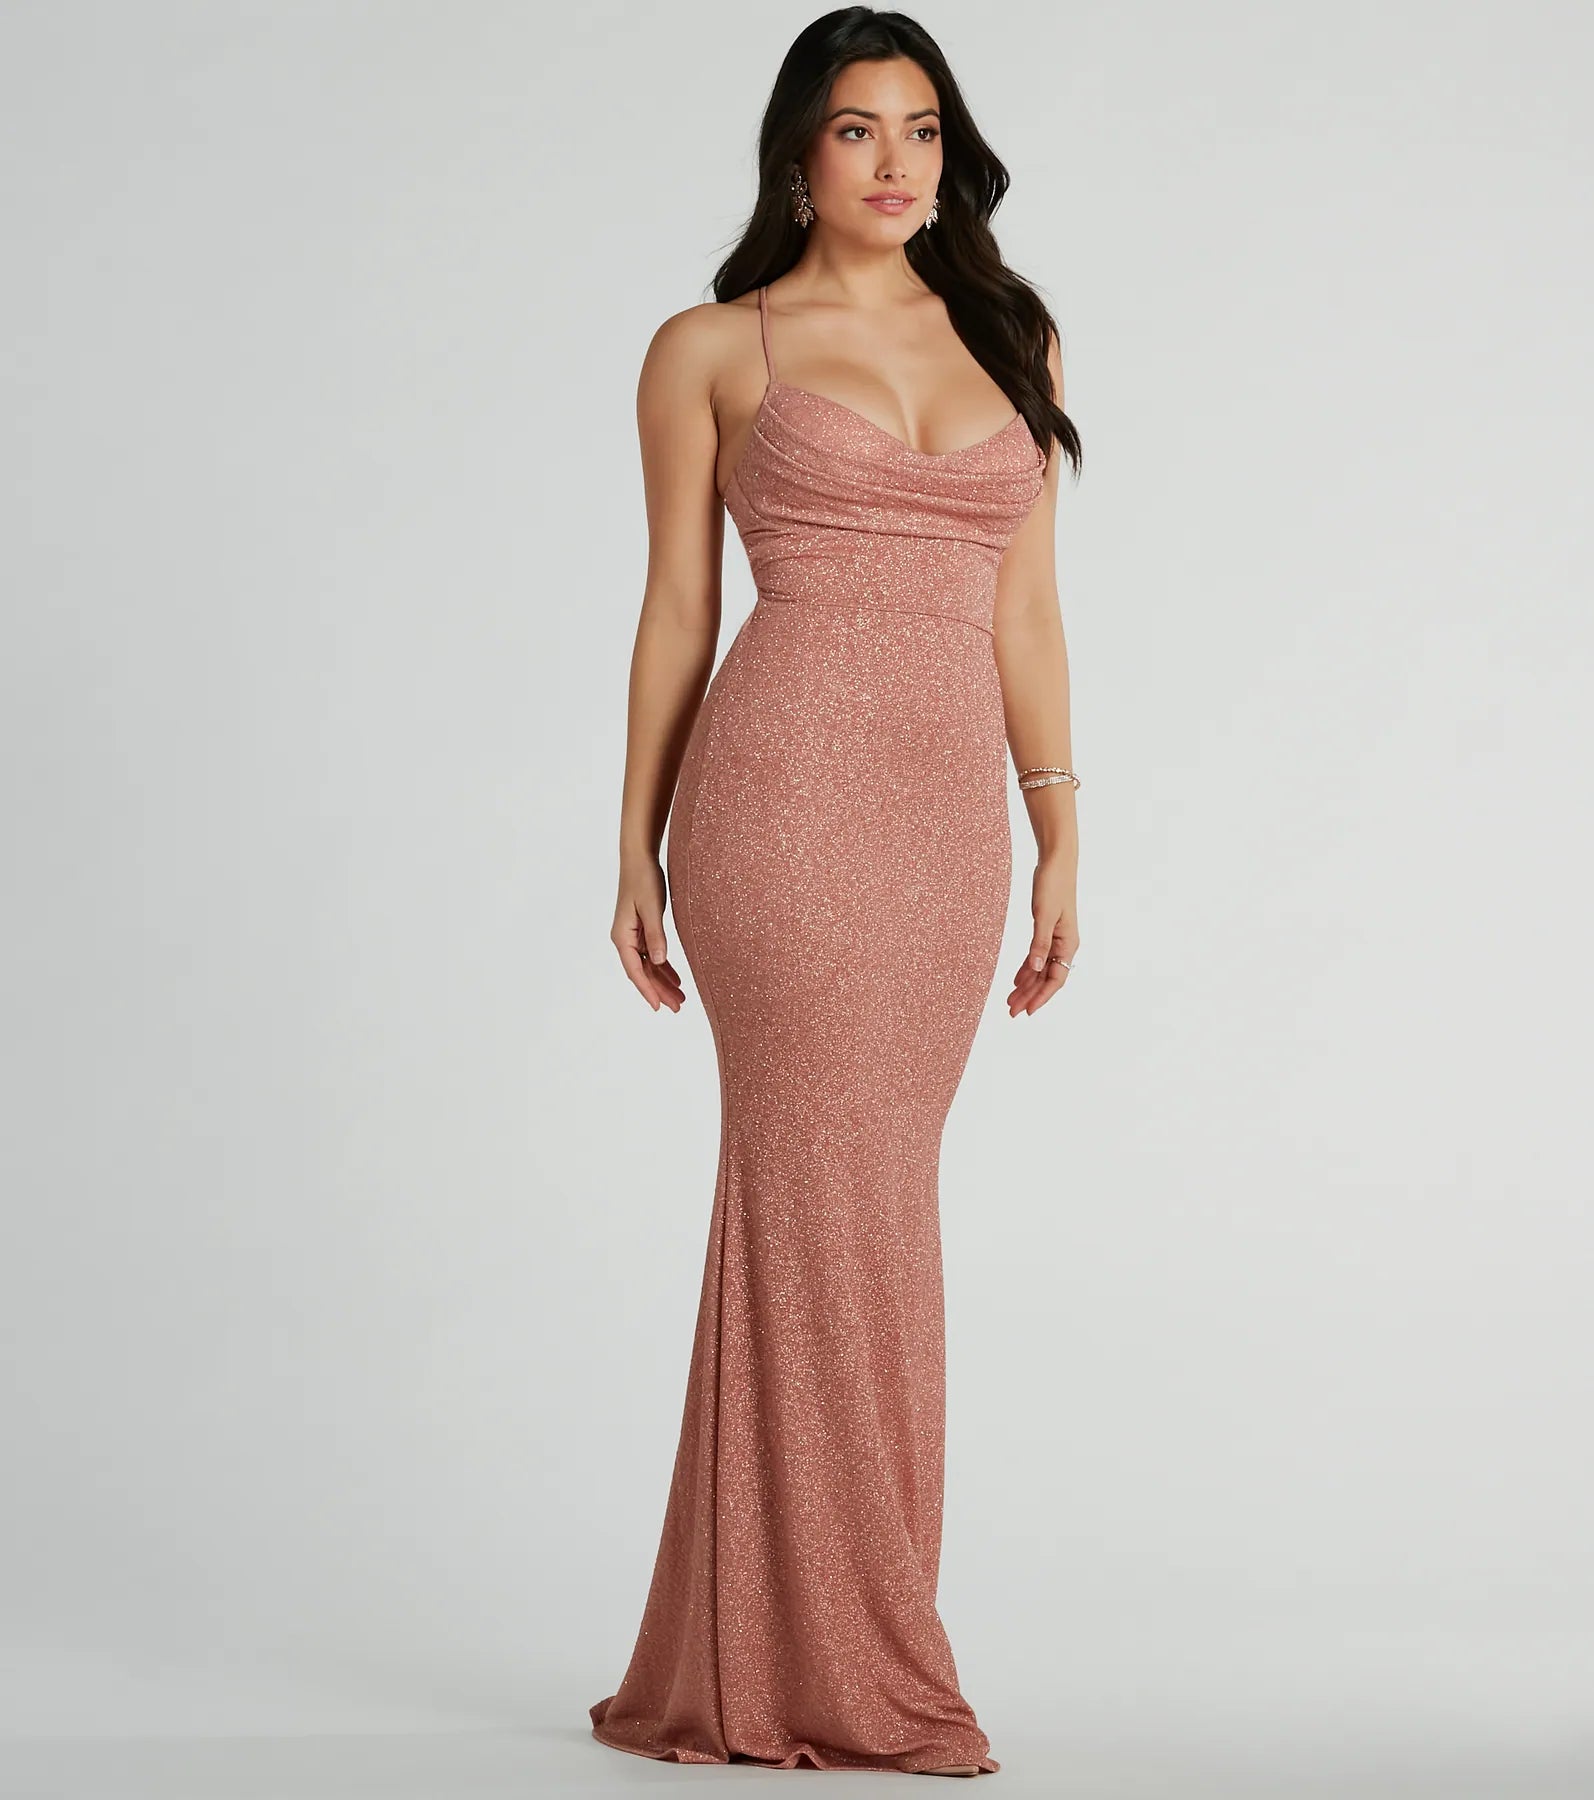 Sophisticated Floor Length Mermaid Cowl Neck Spaghetti Strap Glittering Stretchy Lace-Up Knit Prom Dress/Party Dress